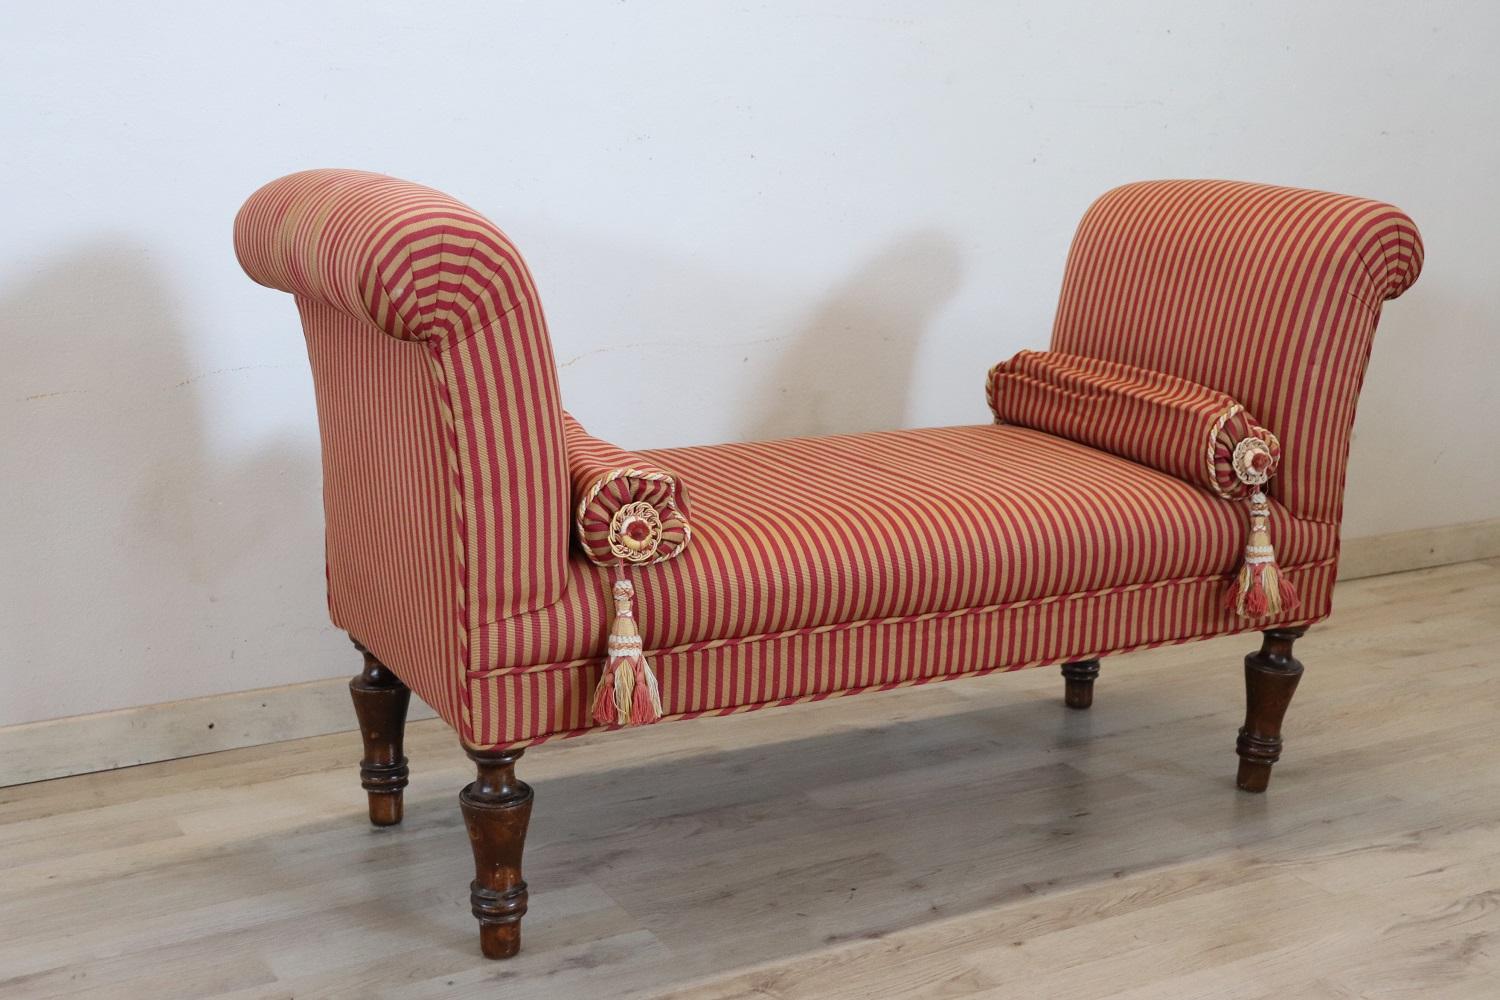 19th century antique italian bench, truly refined, fully padded and covered in elegant red striped fabric. The turned feet are in solid beech wood. Finished on each side, it can also be positioned in the center of the room. Perfect for embellishing